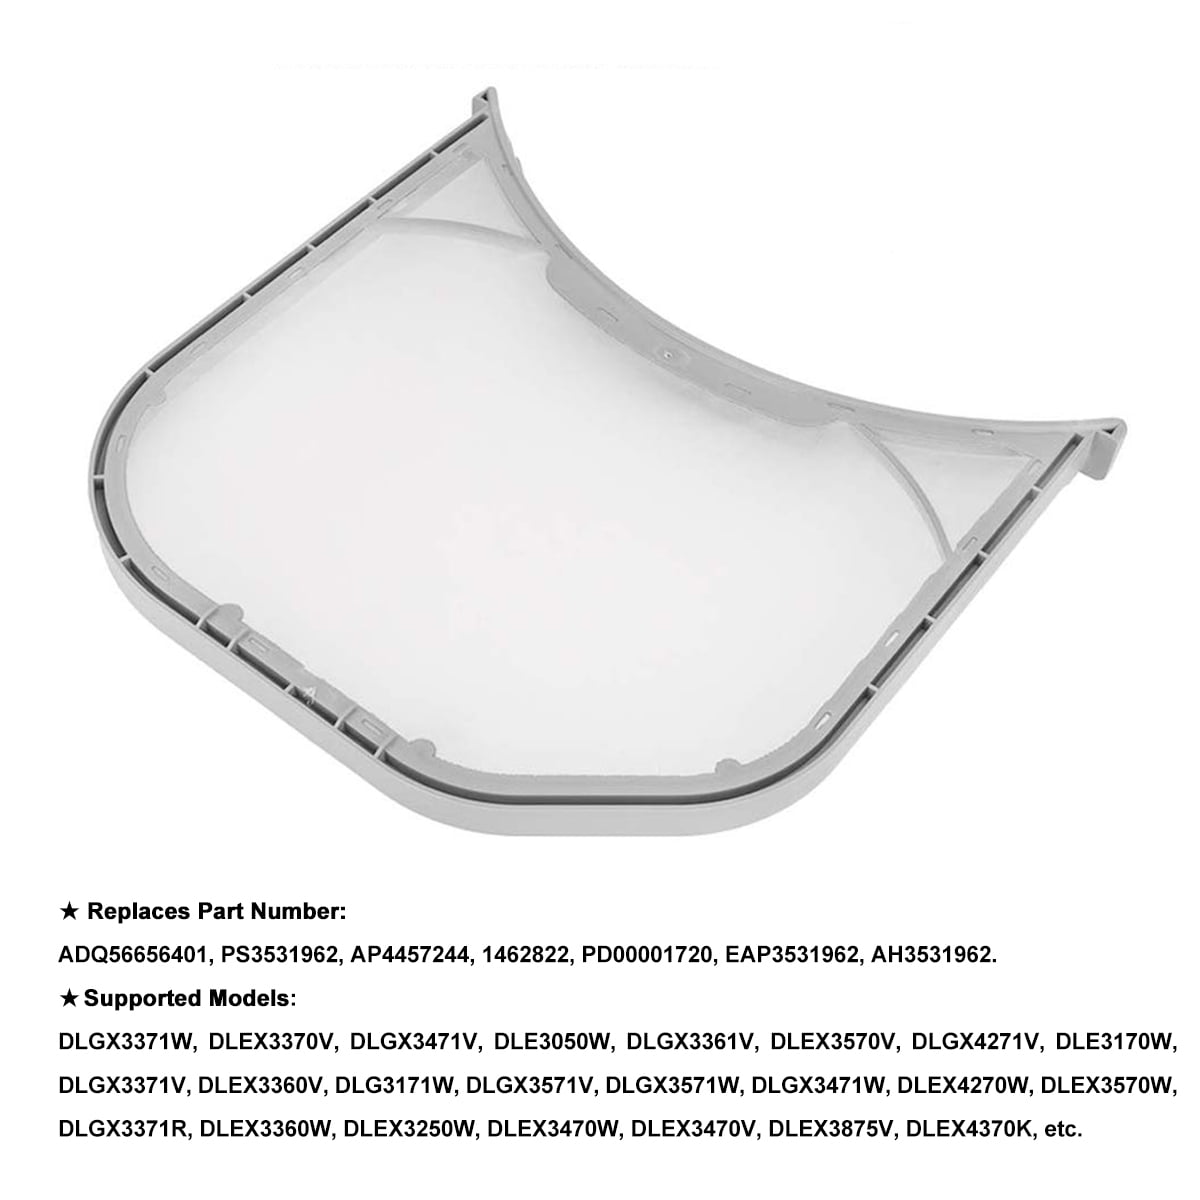 Adq56656401 Dryer Lint Filter Screen Assembly Replacement Ap4457244 Ps3531962 for sale online